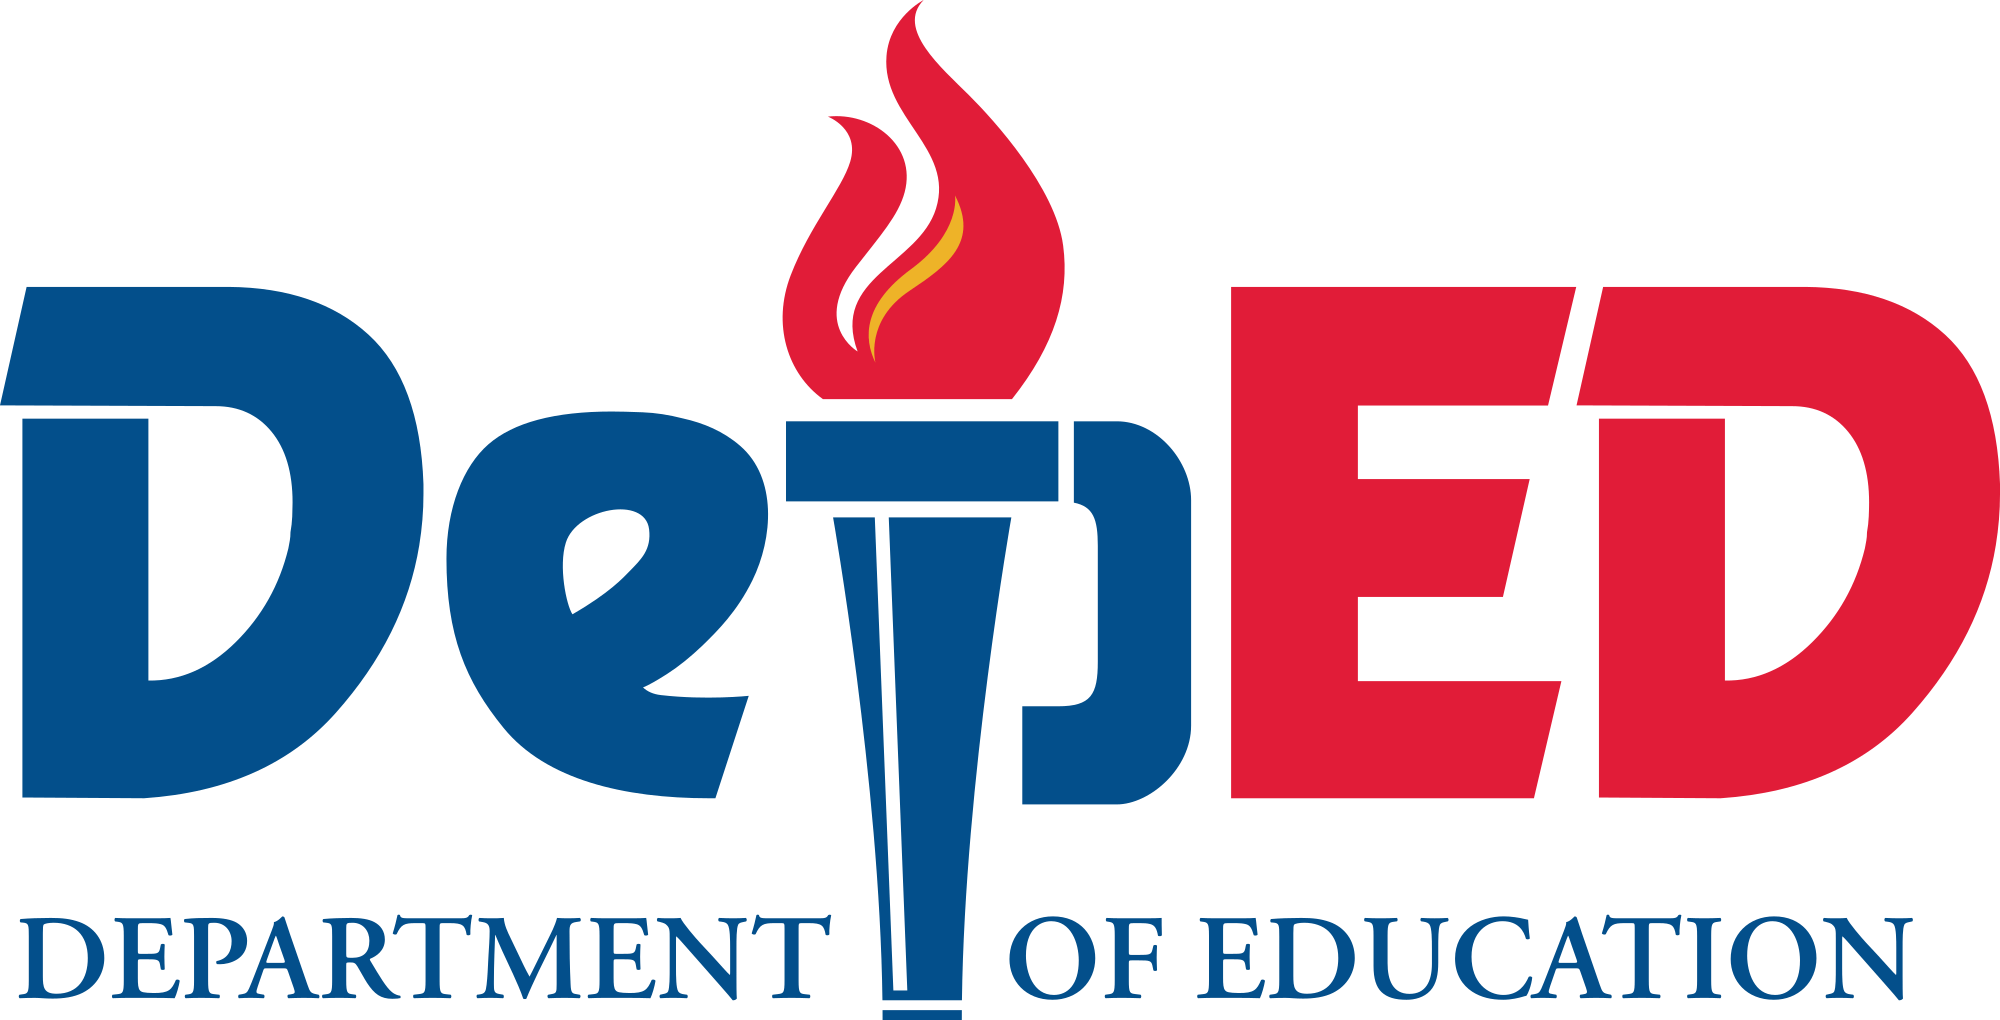 DepEd Logo - Department of Education (Philippines)